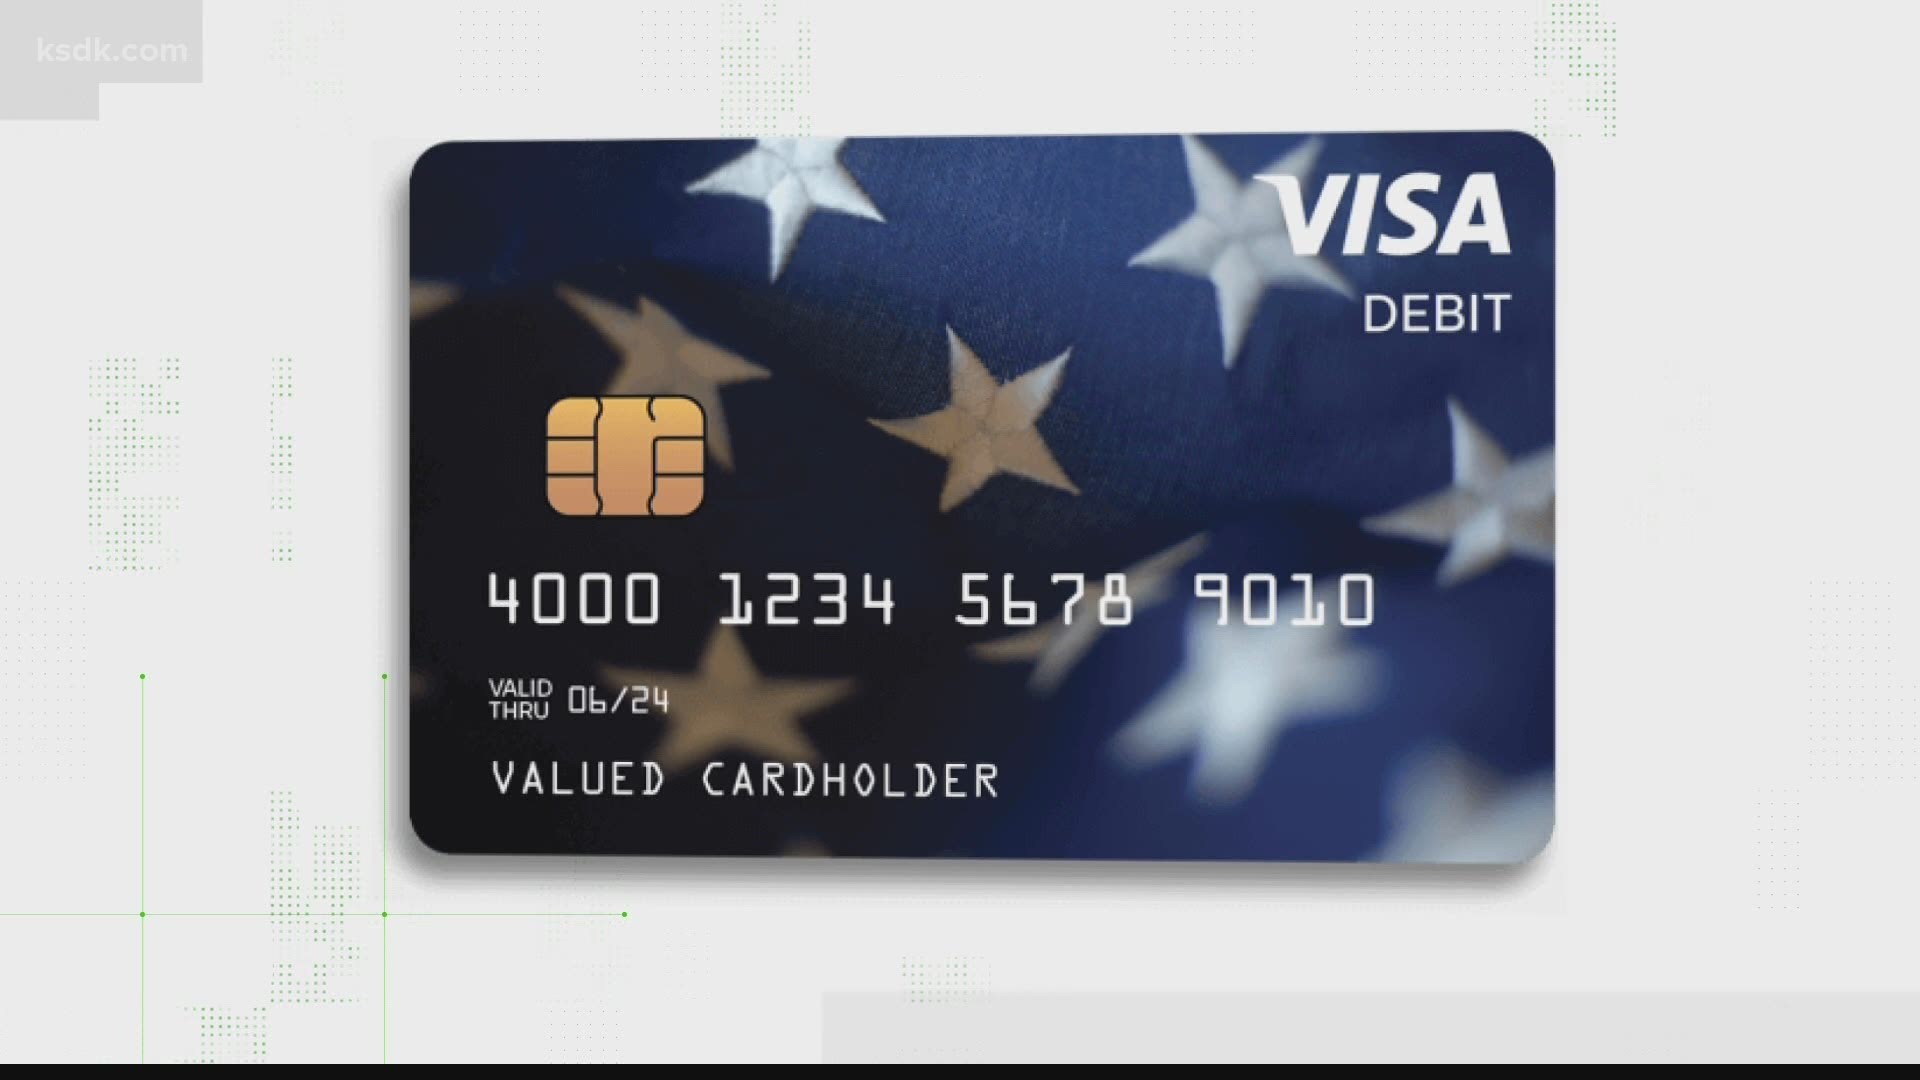 Millions of people will be getting their stimulus payment in the form of a debit card, but the government will not be able to see how you are using it.